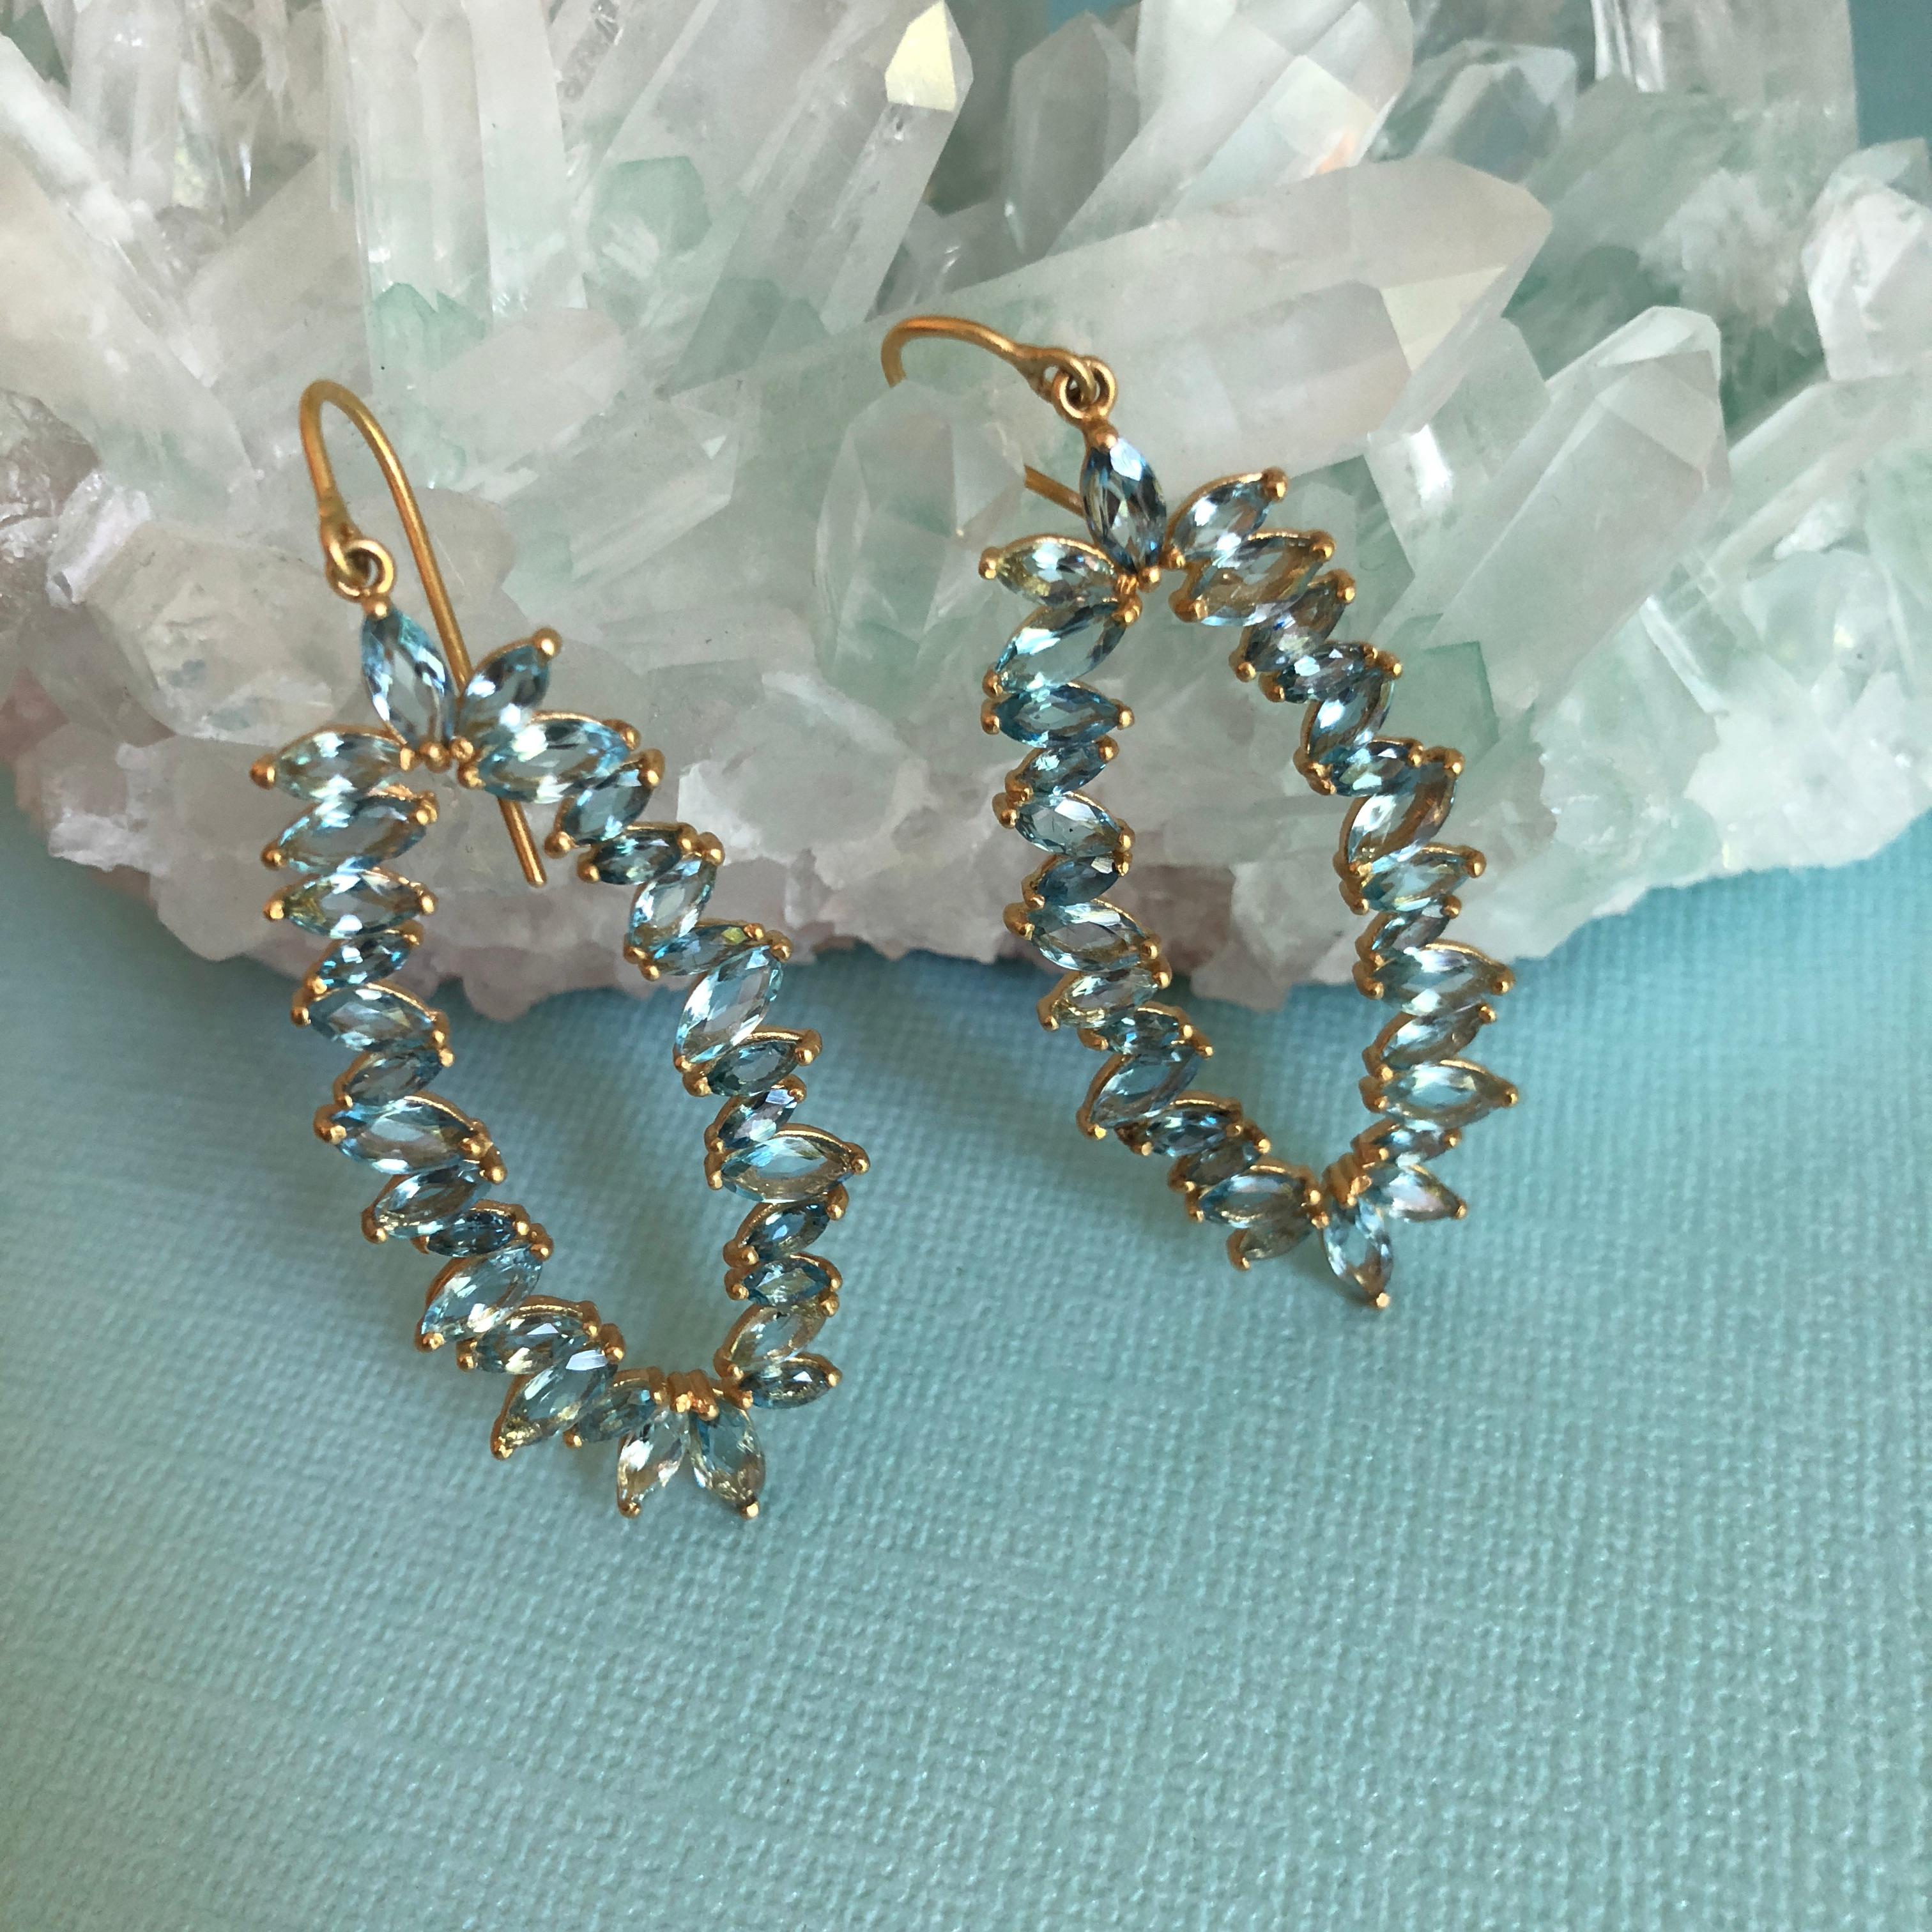 These brilliant blue 7.33 cts marquis shaped Aquamarines are set in a nearly invisible prong setting, allowing the stones to sparkle and dazzle in your ears.  Set in 18kt Gold and open in the middle, these earrings are lightweight and perfect for